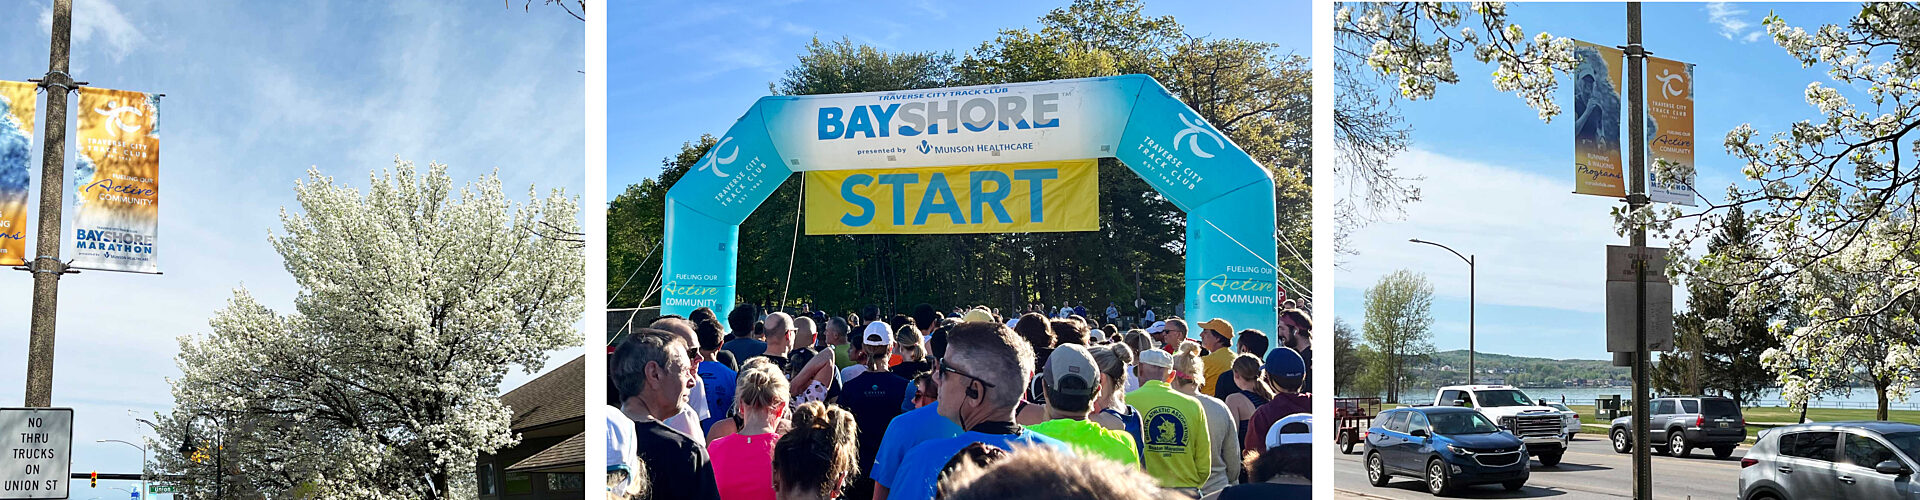 Light pole banners and a start banner for the Bayshore Marathon